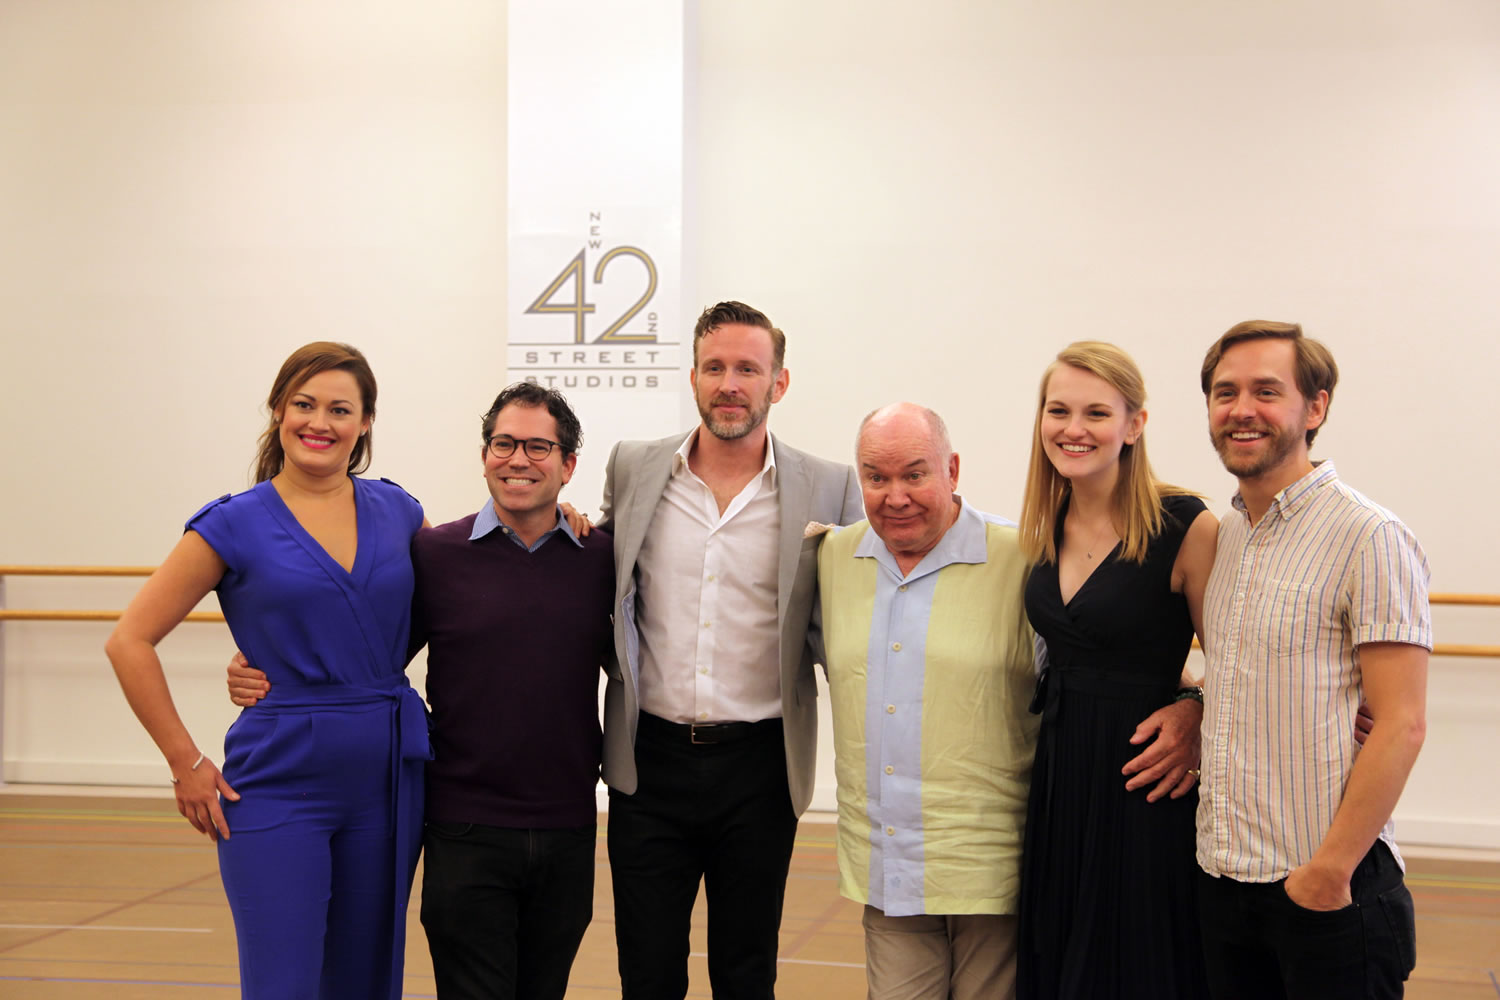 In this Sept. 2, 2015 photo, from left, Ashley Brown, who will portray Mother Abbess, music supervisor Andy Einhorn, Ben Davis, who will portray Captain von Trapp, director Jack O'Brien, Kerstin Anderson, who will portray Maria, and choreographer Danny Mefford appear during a press day for the national tour of &quot;The Sound of Music,&quot; in New York. The production will travel to Boise, Idaho from Sept. 14-15, before heading to Los Angeles from Sept. 20 - Oct. 31.